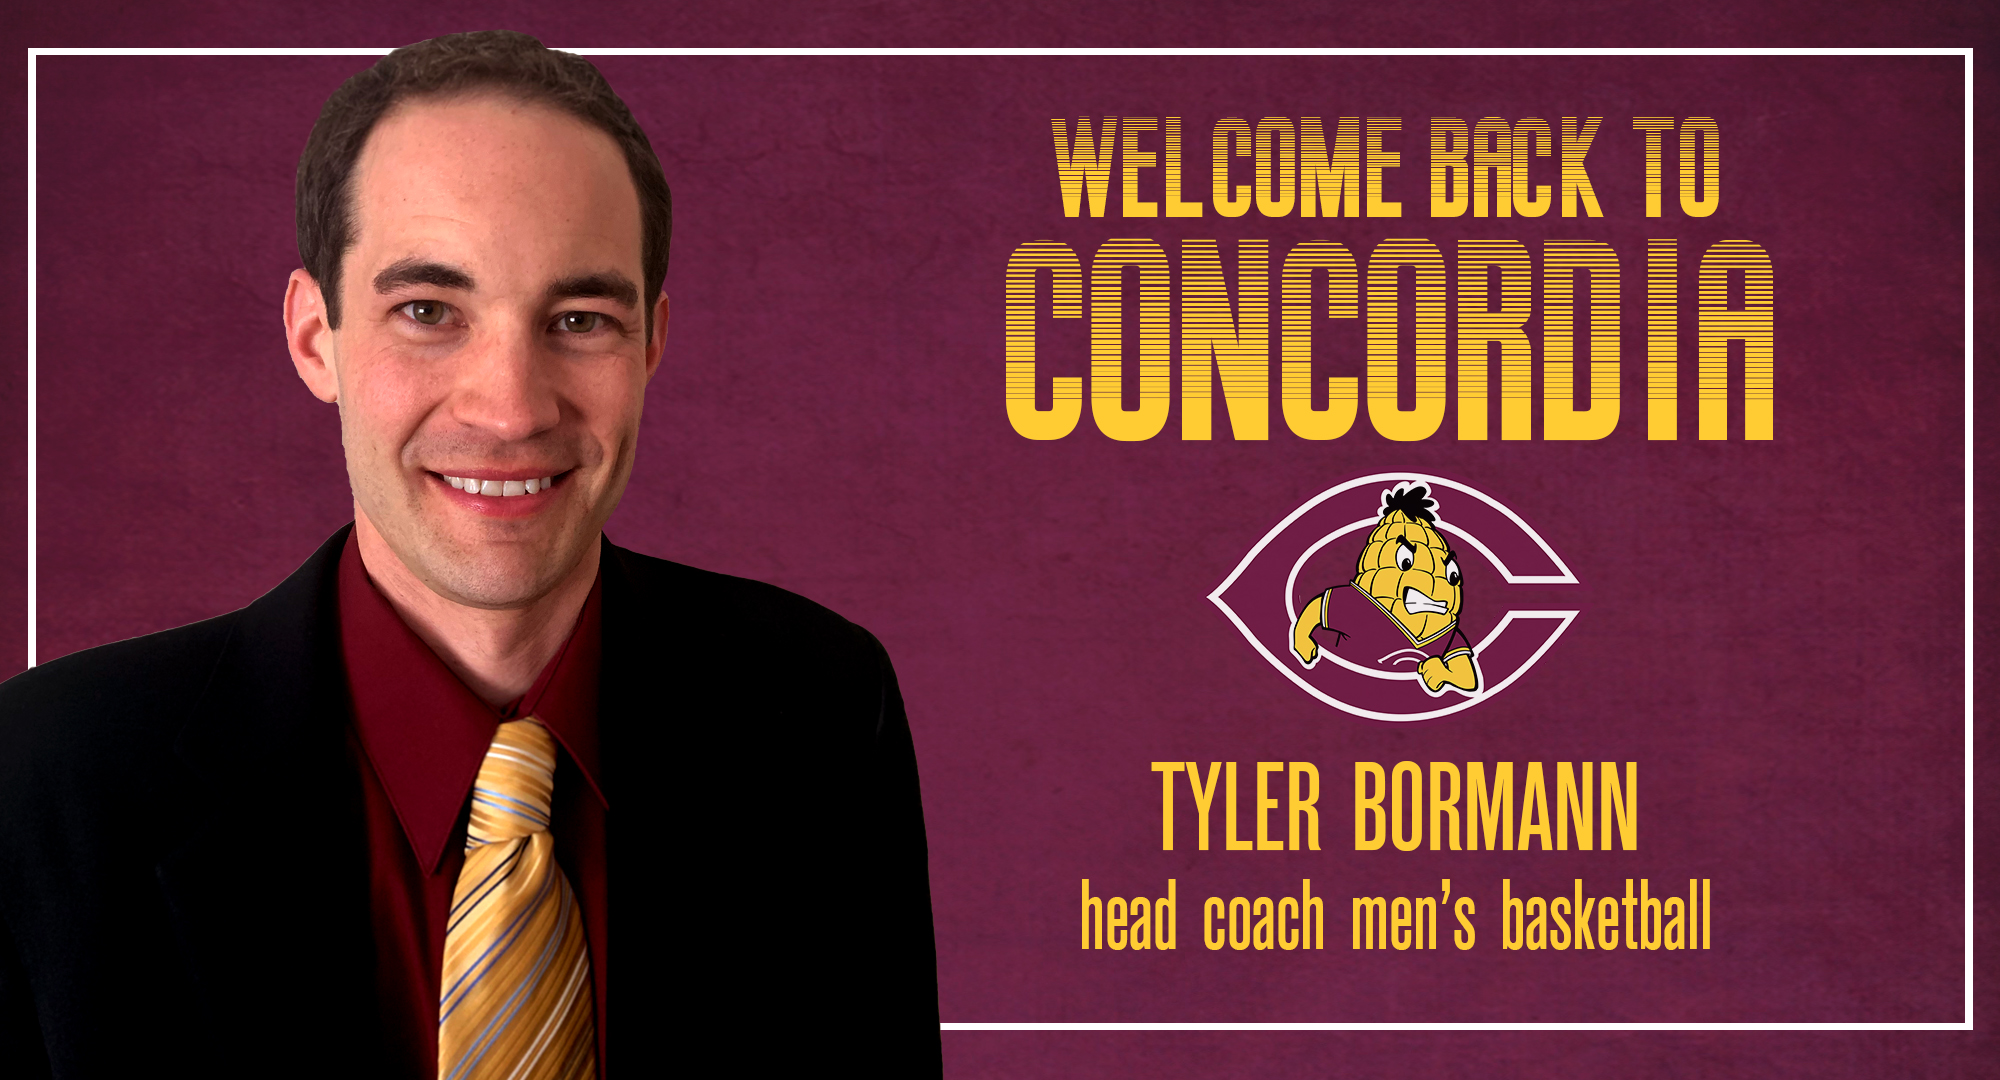 Tyler Bormann became the 12th head coach in the history of the Cobber men's basketball program.